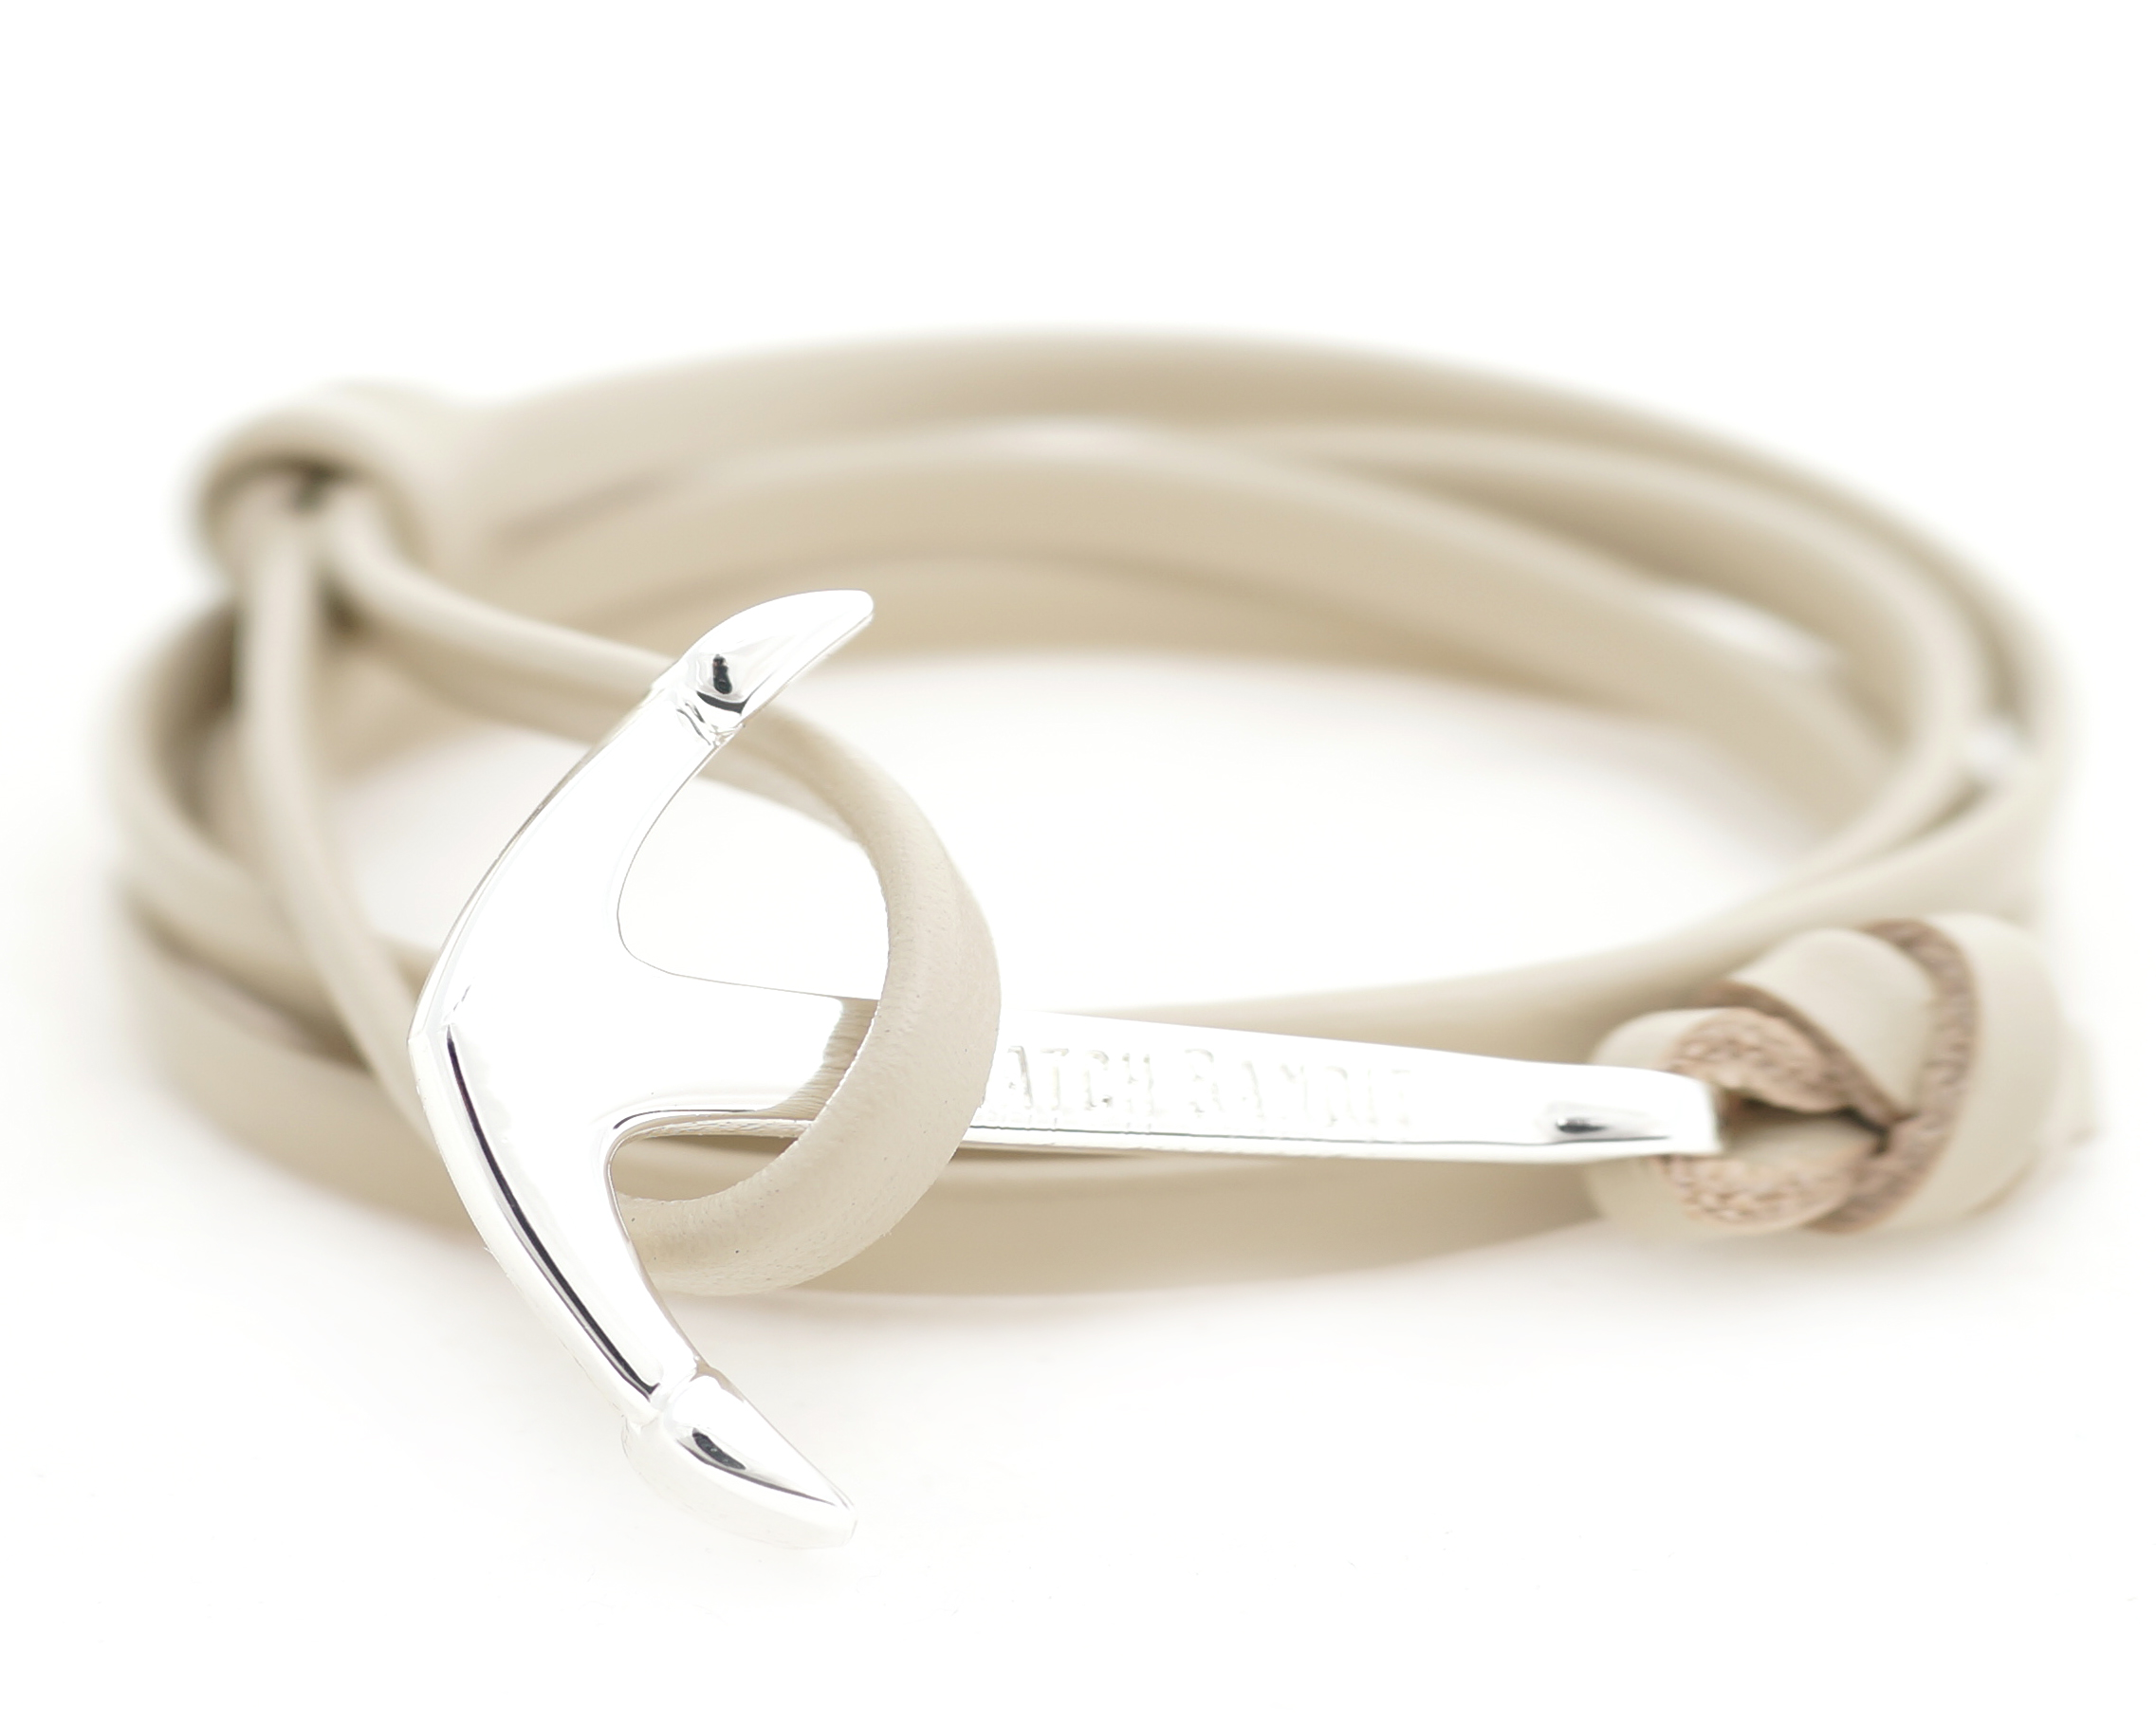 ... bracelets bracelets leather cord white gold anchors white gold plated